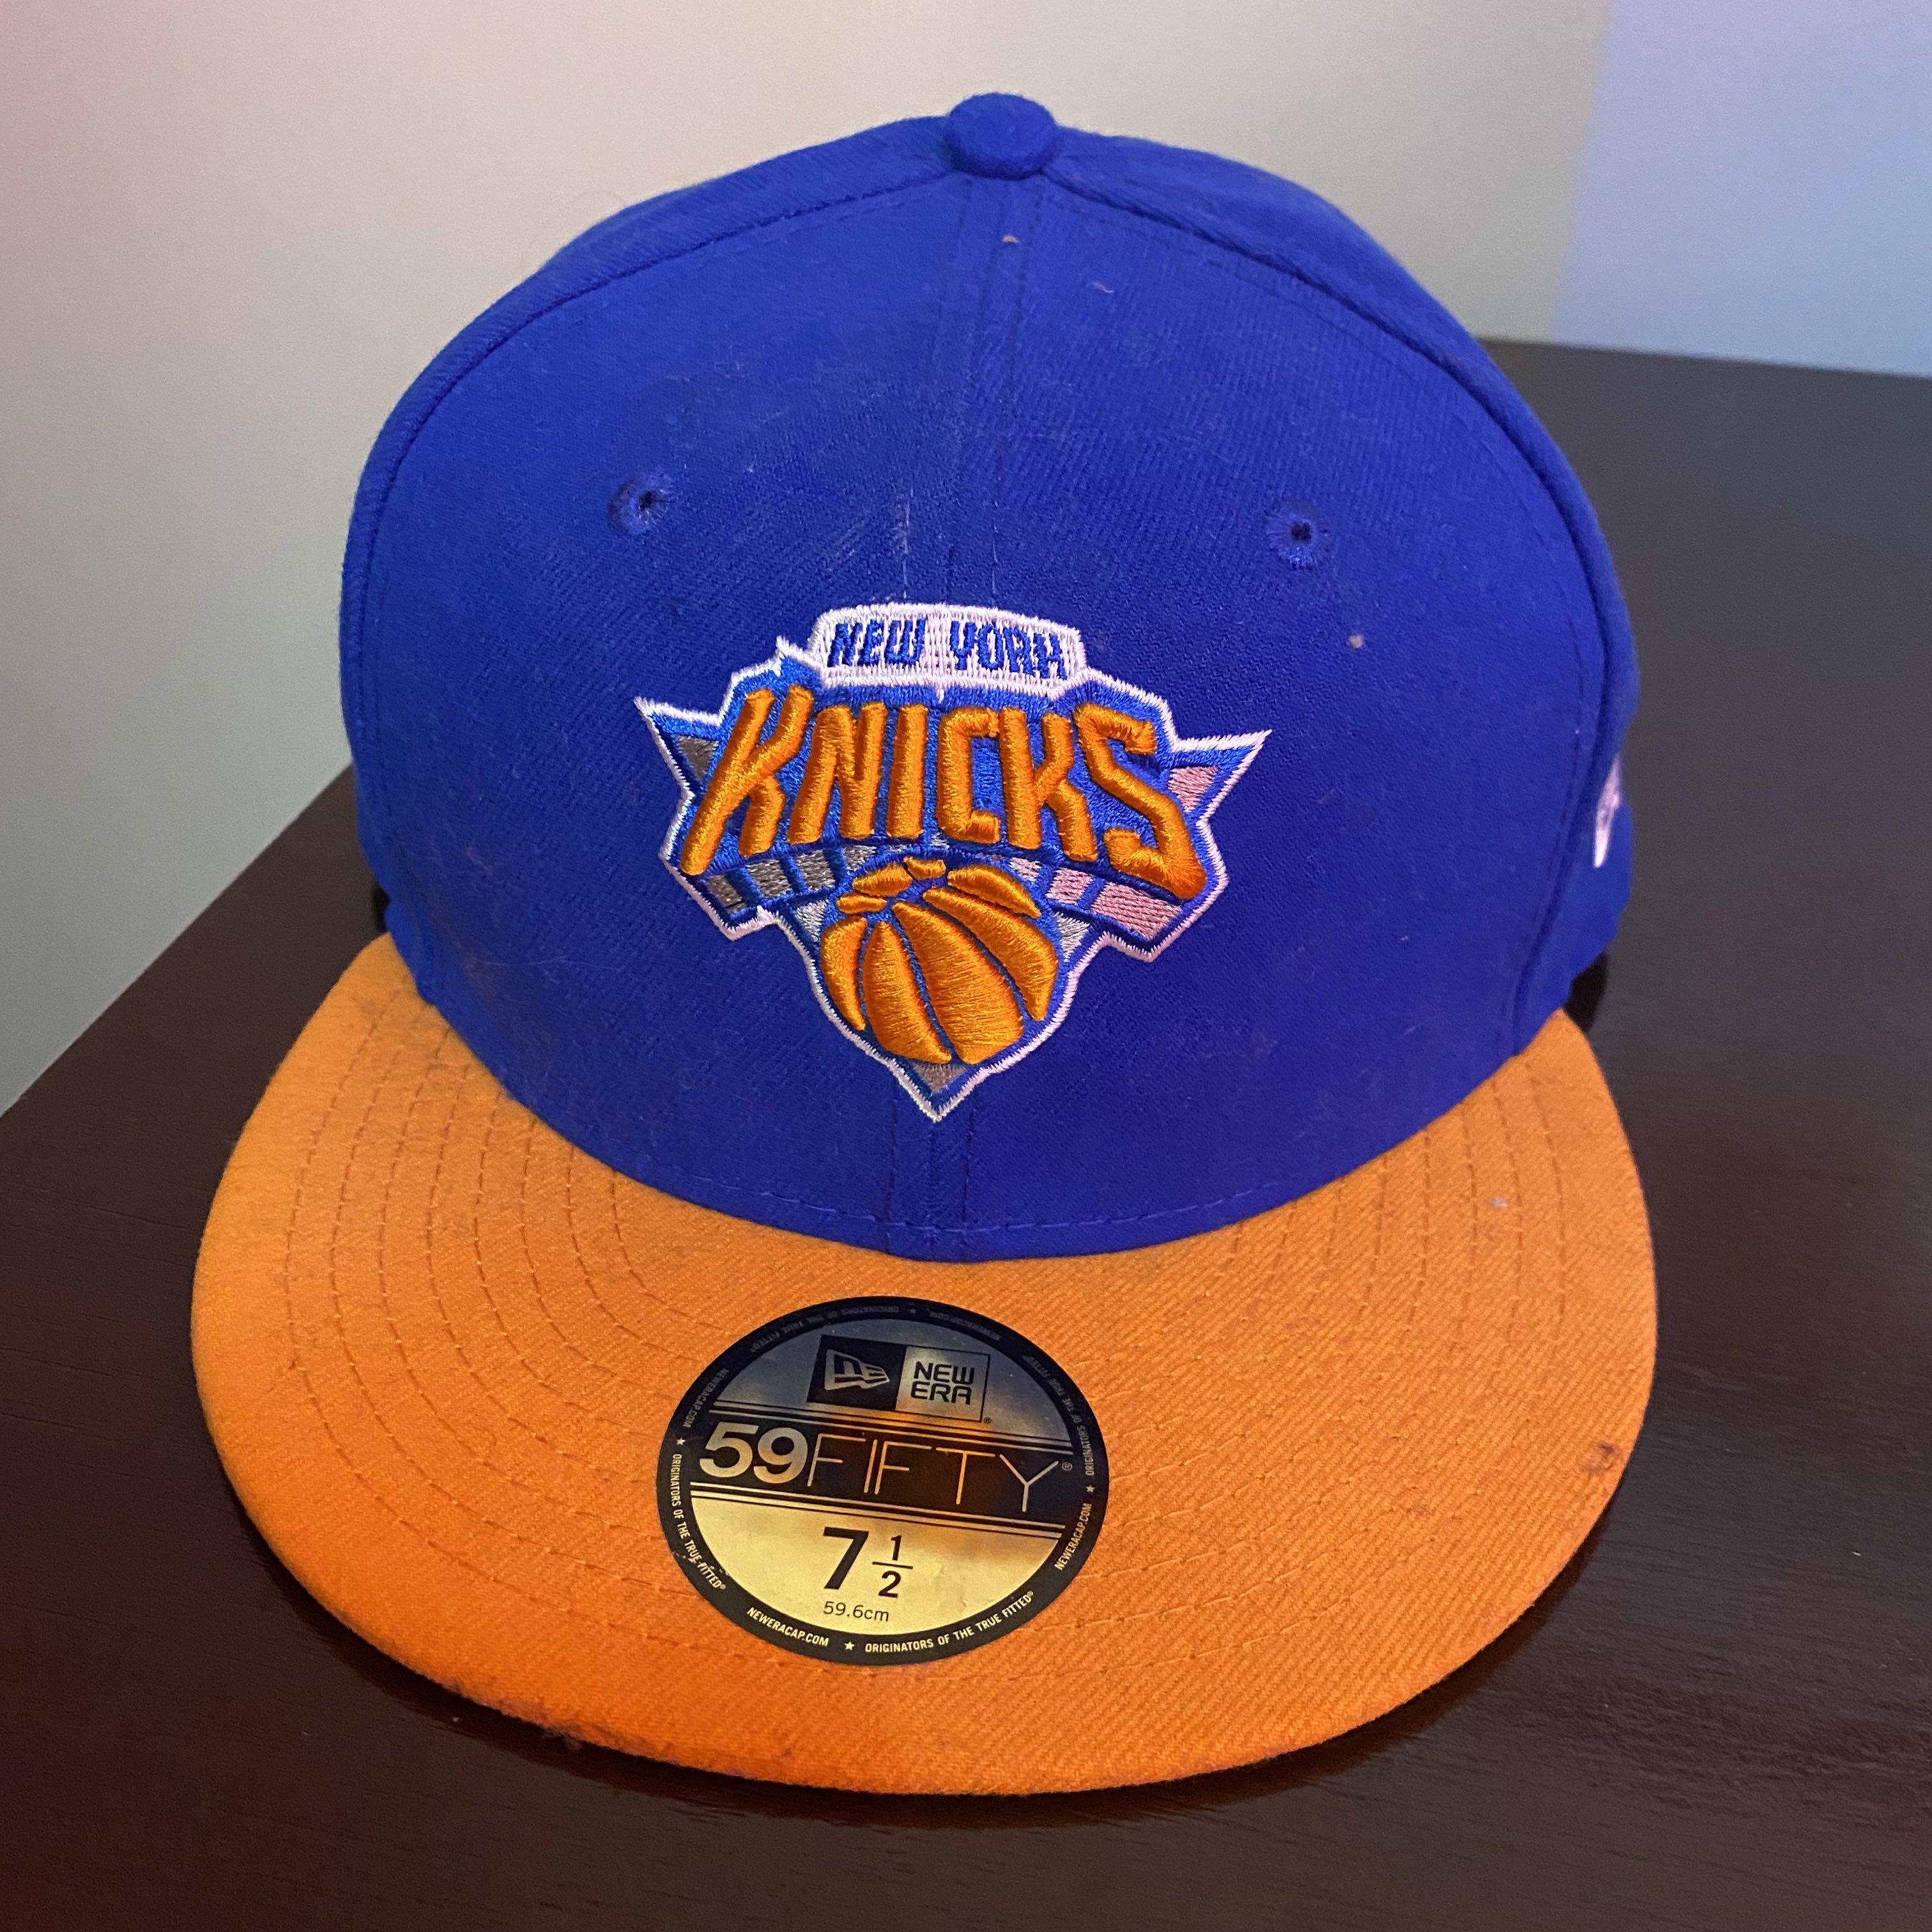 Knicks Cap - I Always Loved Having Knicks Hats In Different Colors Too ...